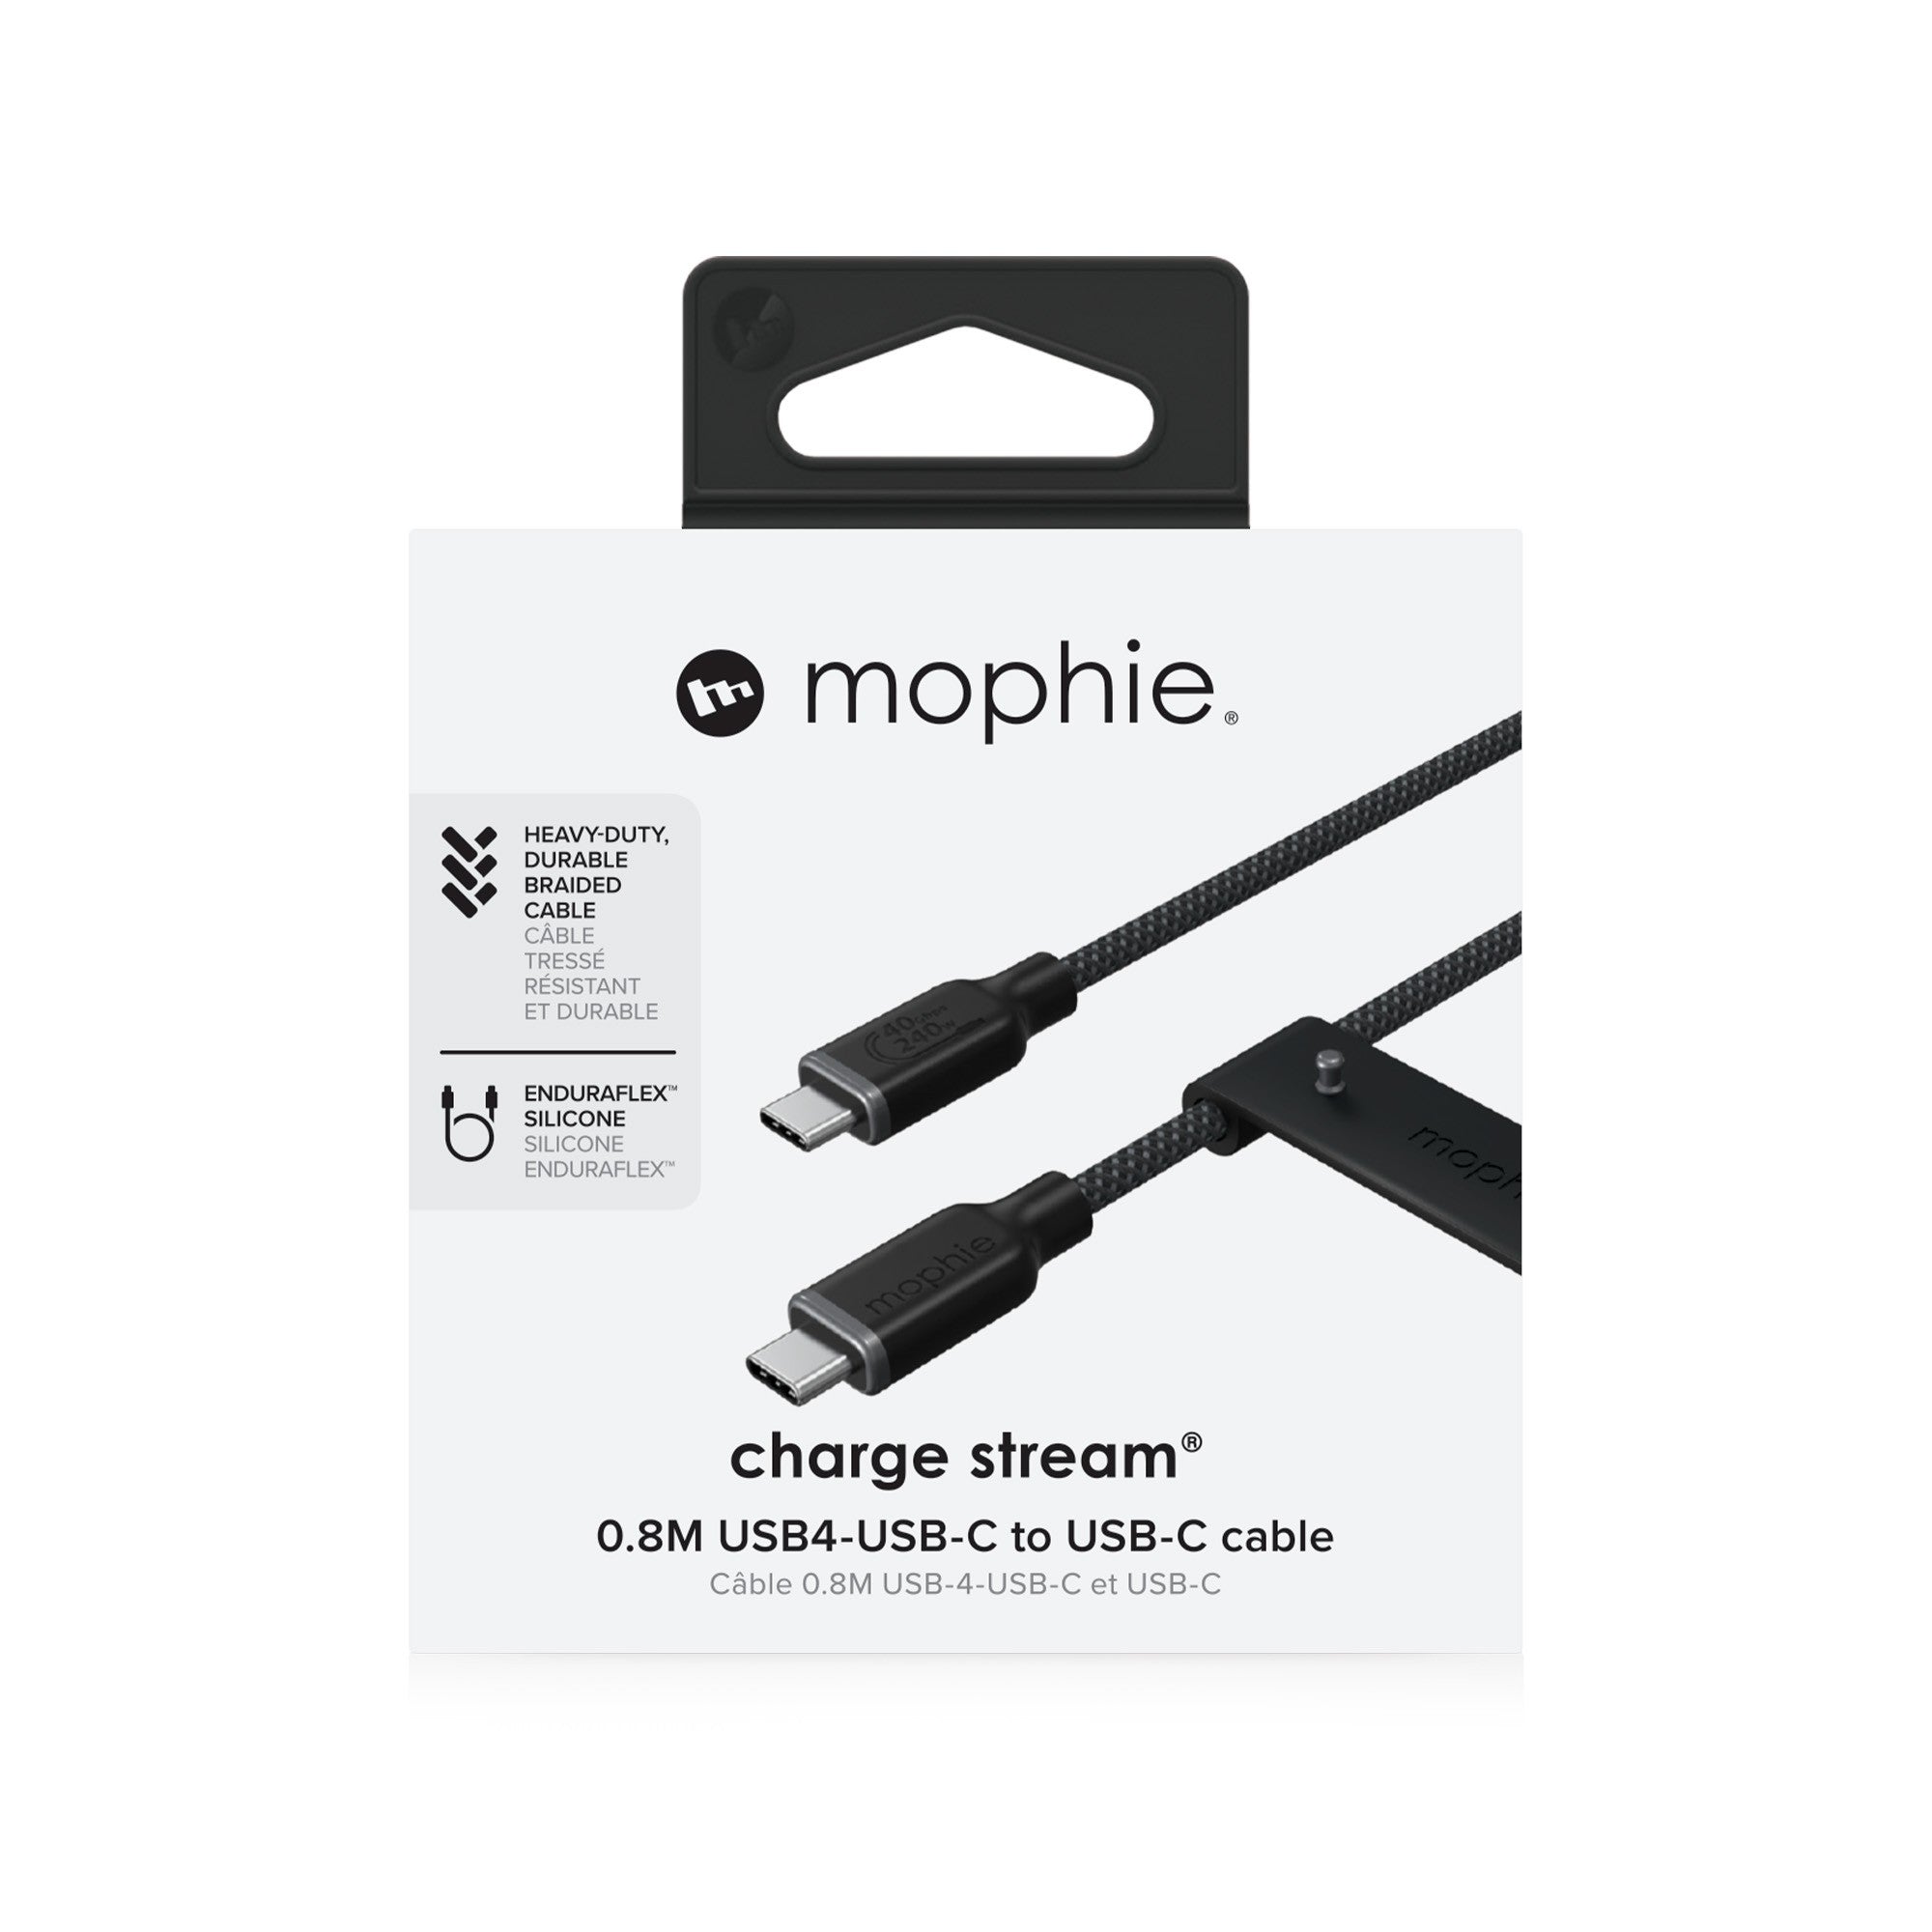 Mophie 80cm USB4 USB-C to USB-C Charge and Sync Cable - Black - 15-12594